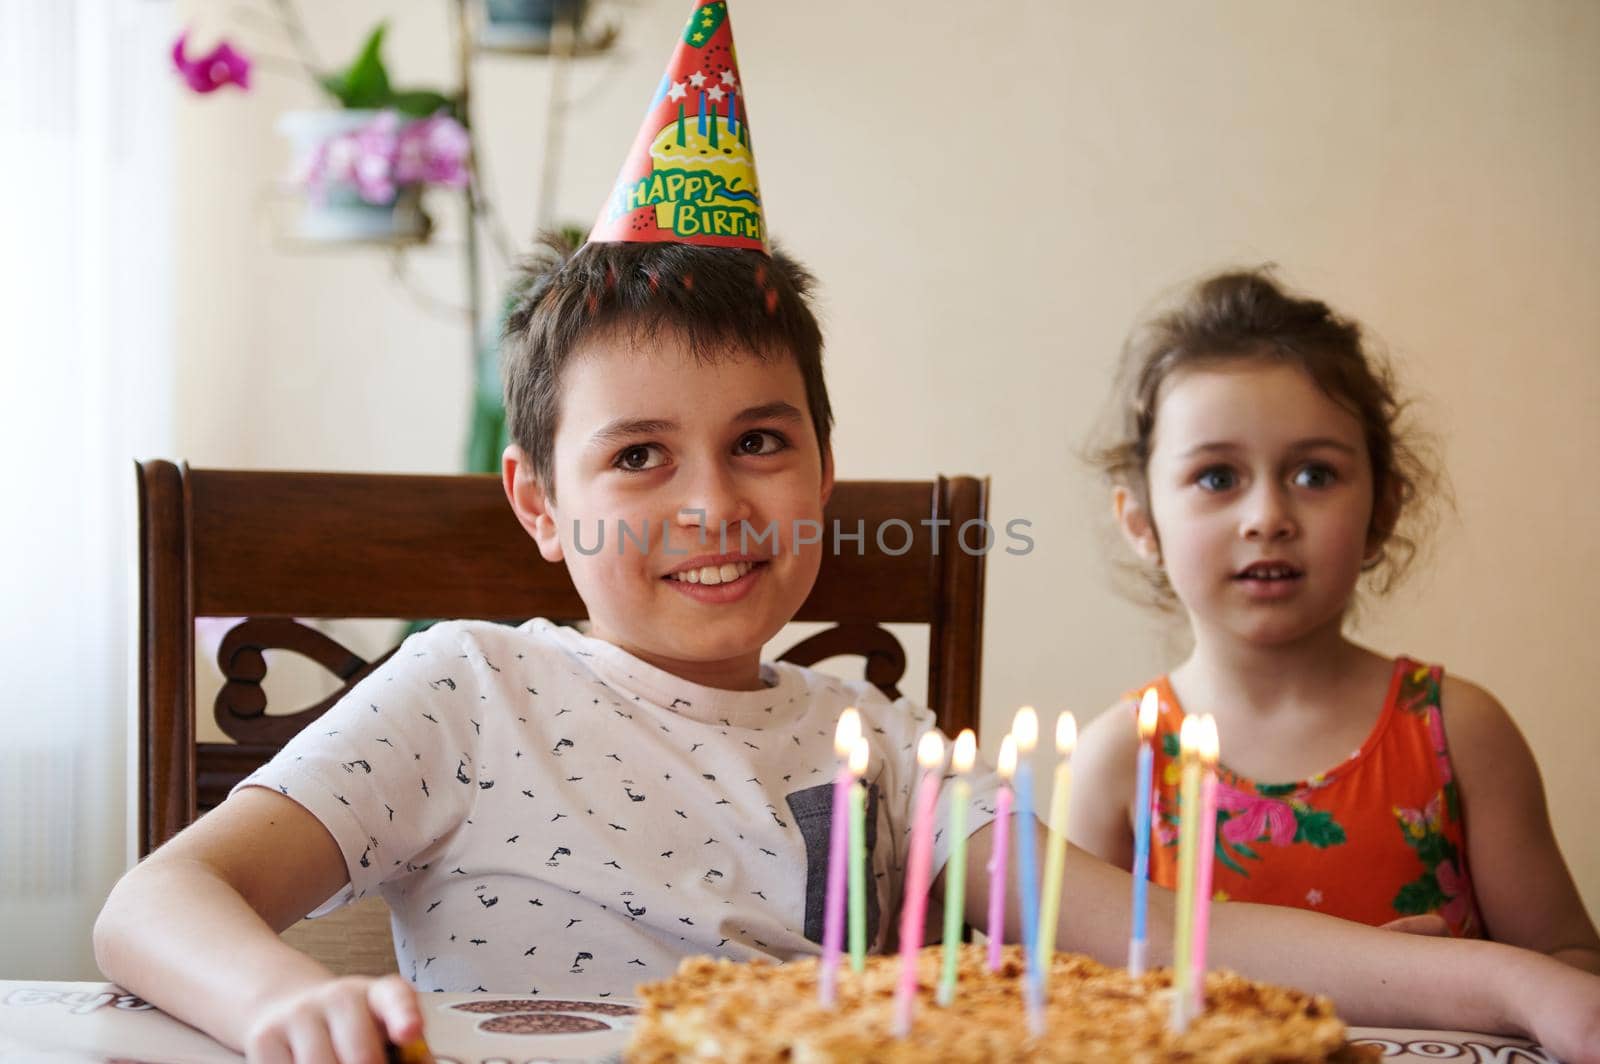 Cheerful handsome 10 year old boy sitting at the table with a delicious cake with lit birthday candles, next to his blurry little sister celebrating together birthday party by artgf